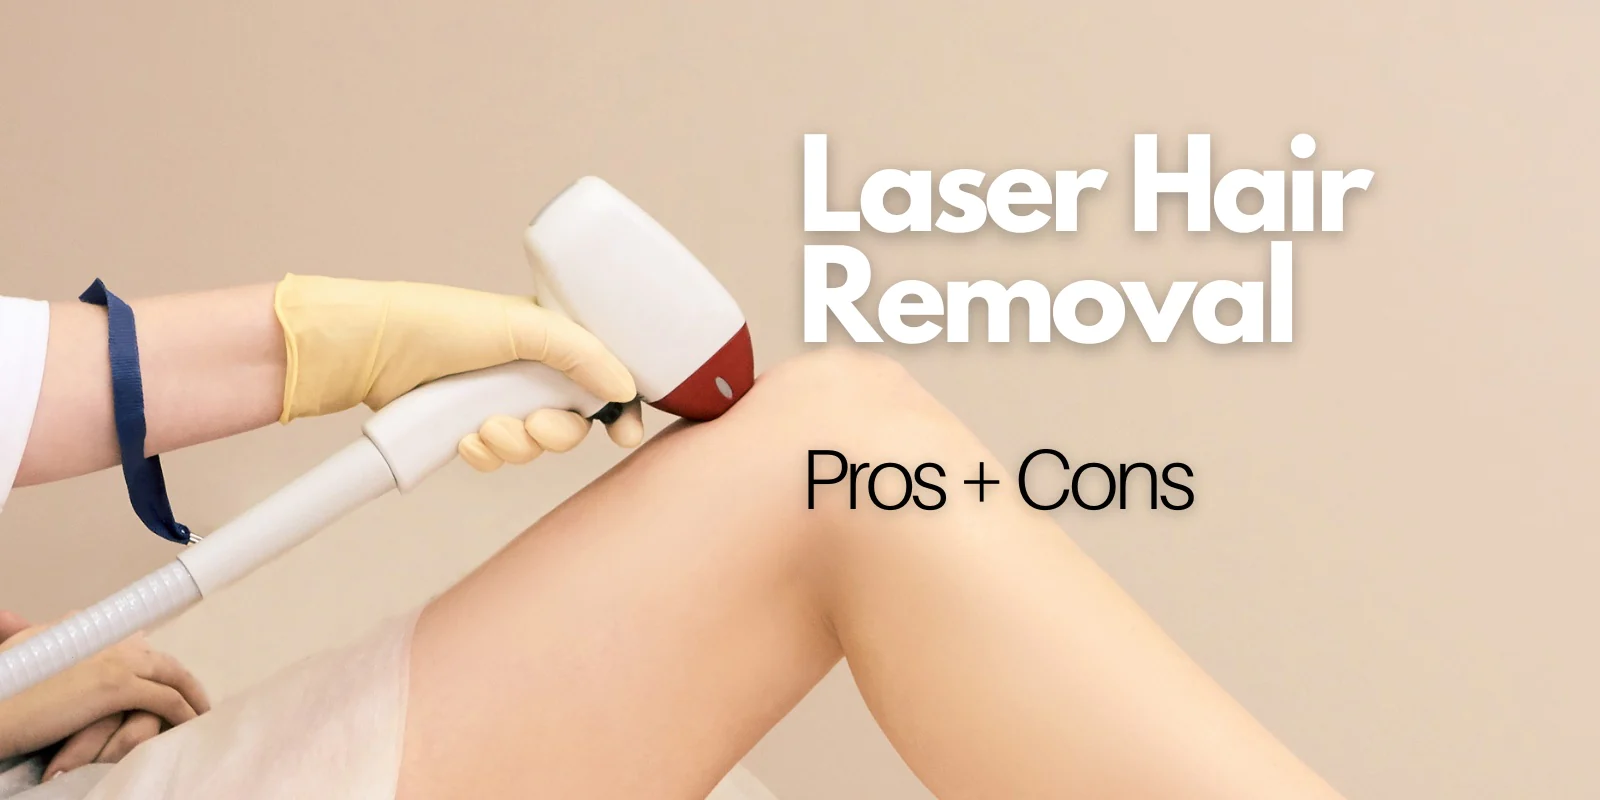 Which Is Better for You: Laser Hair Removal or Regular Methods?